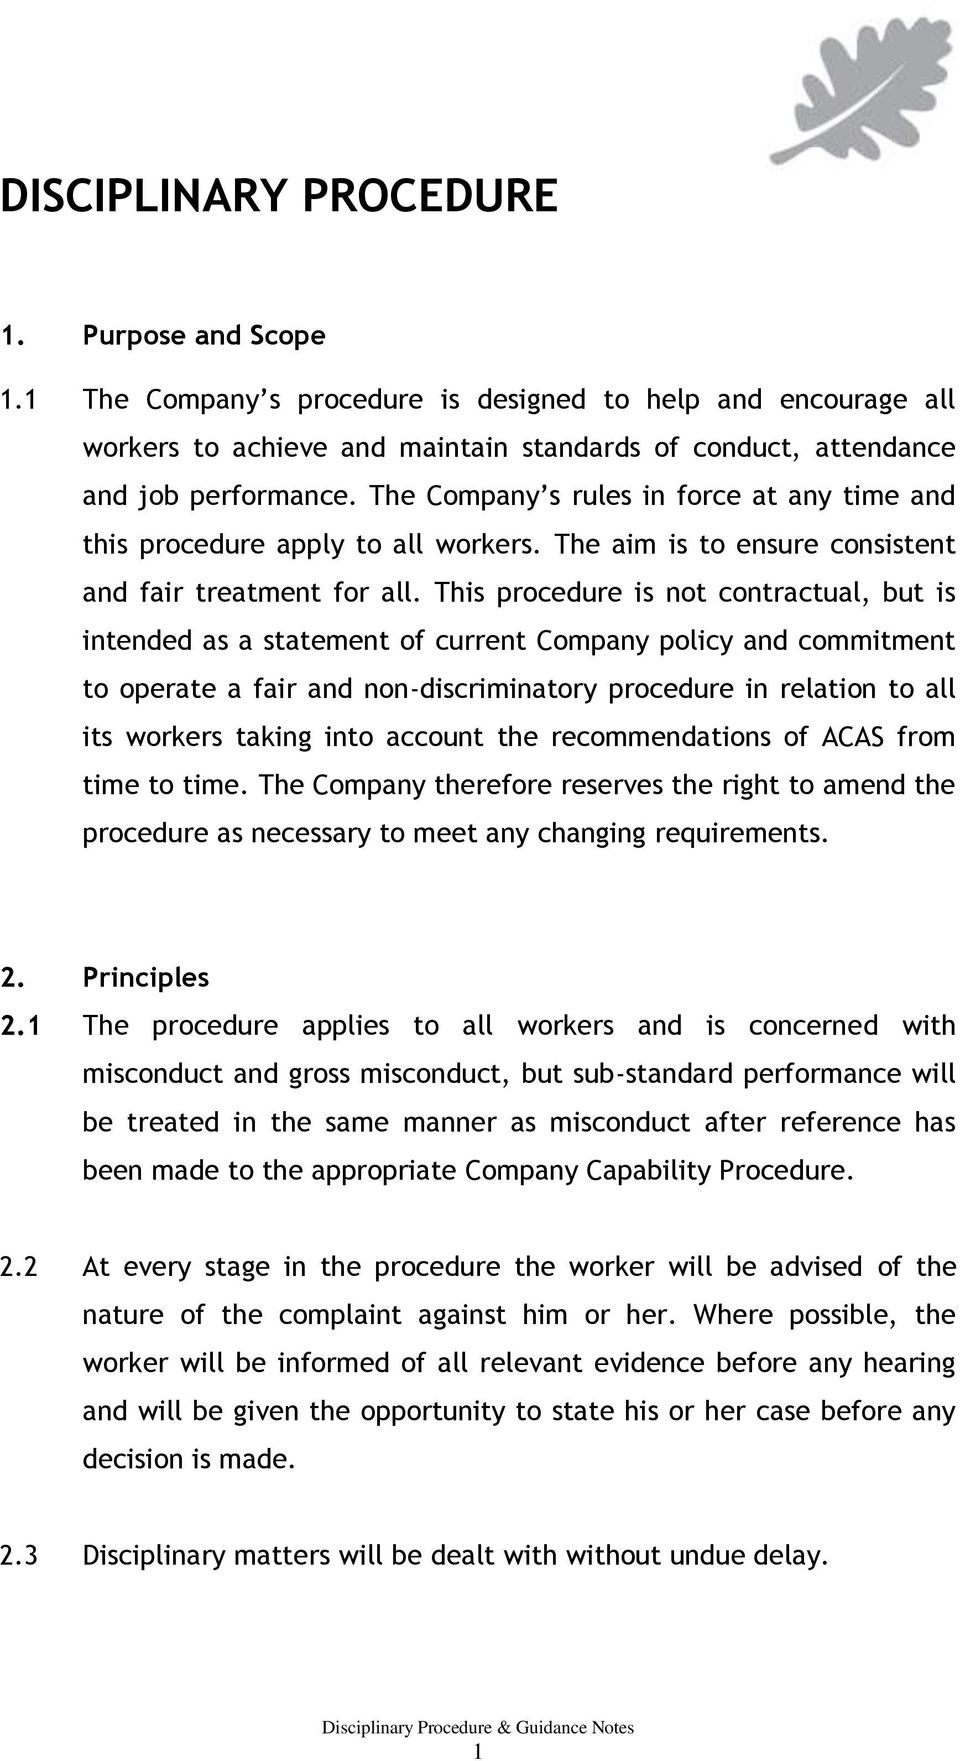 This procedure is not contractual, but is intended as a statement of current Company policy and commitment to operate a fair and non-discriminatory procedure in relation to all its workers taking